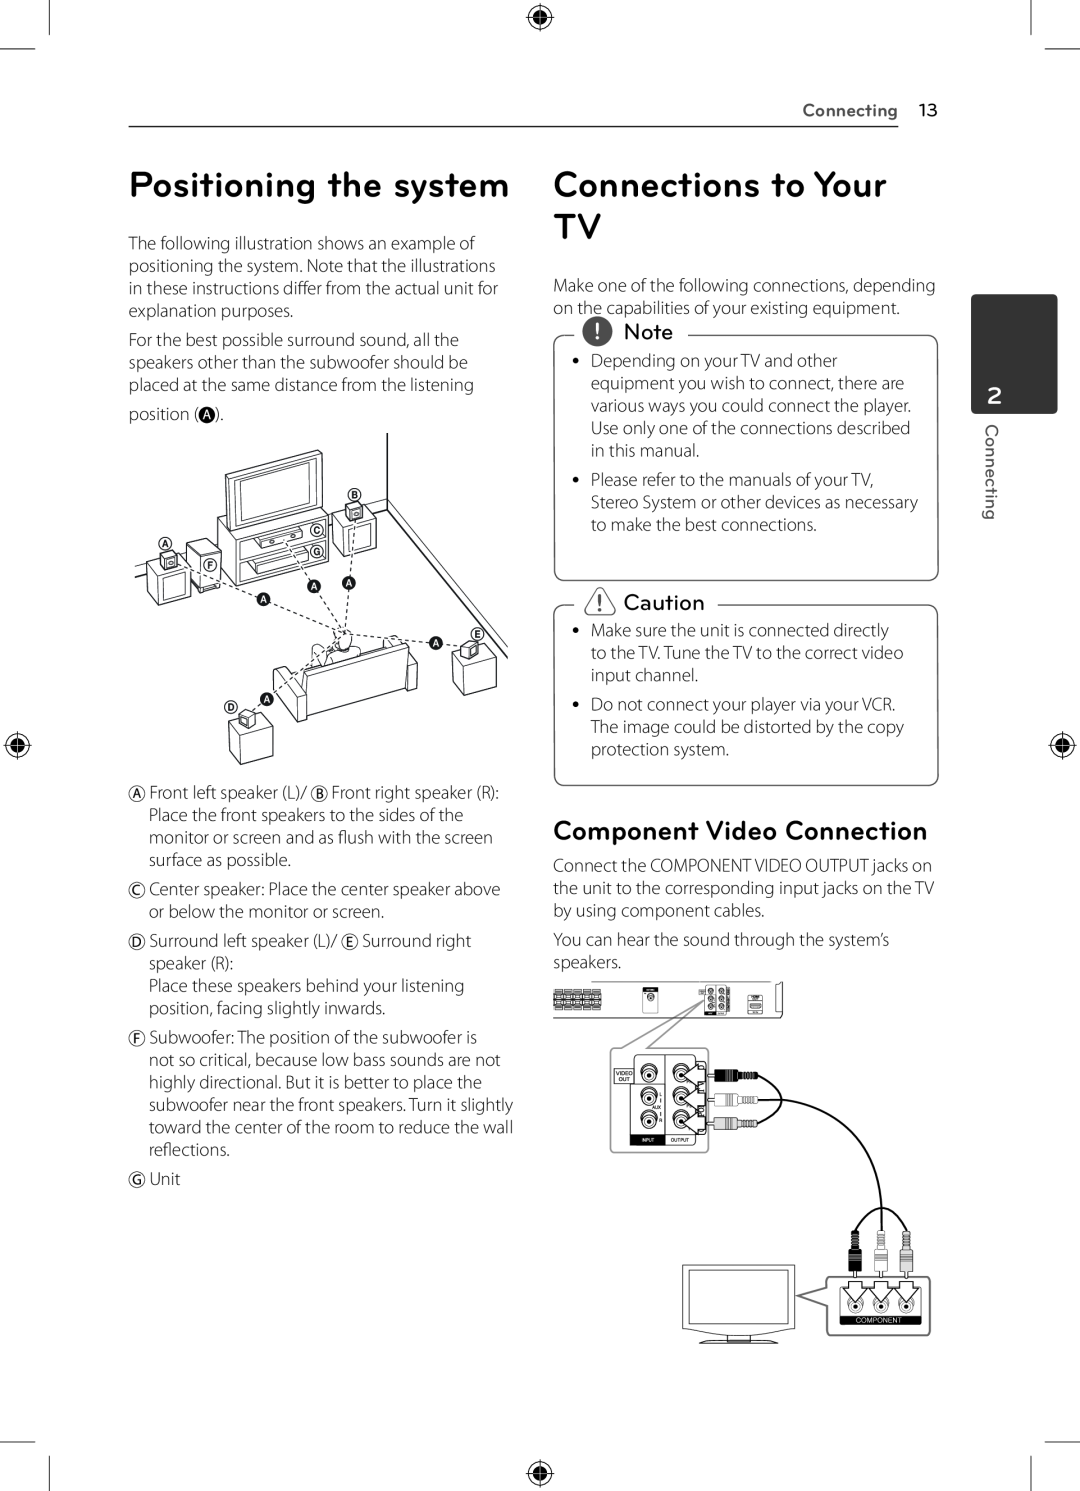 LG Electronics DH4220S owner manual Positioning the system, Connections to Your TV, Component Video Connection, Connecting 